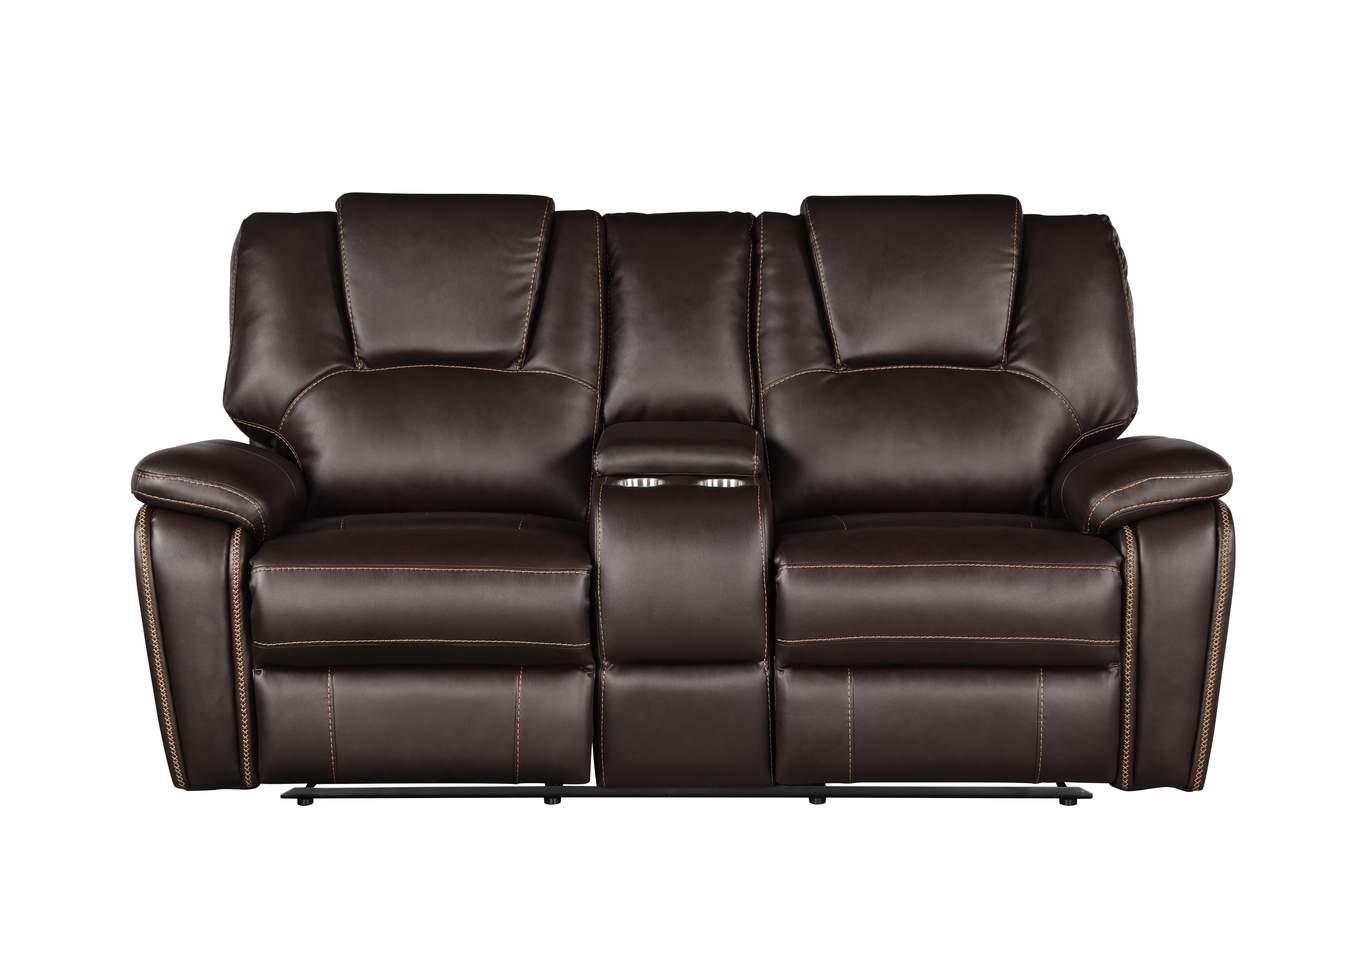 Contemporary, Modern Recliner Loveseat HONG KONG Brown GHF-733569398461 in Brown Eco Leather